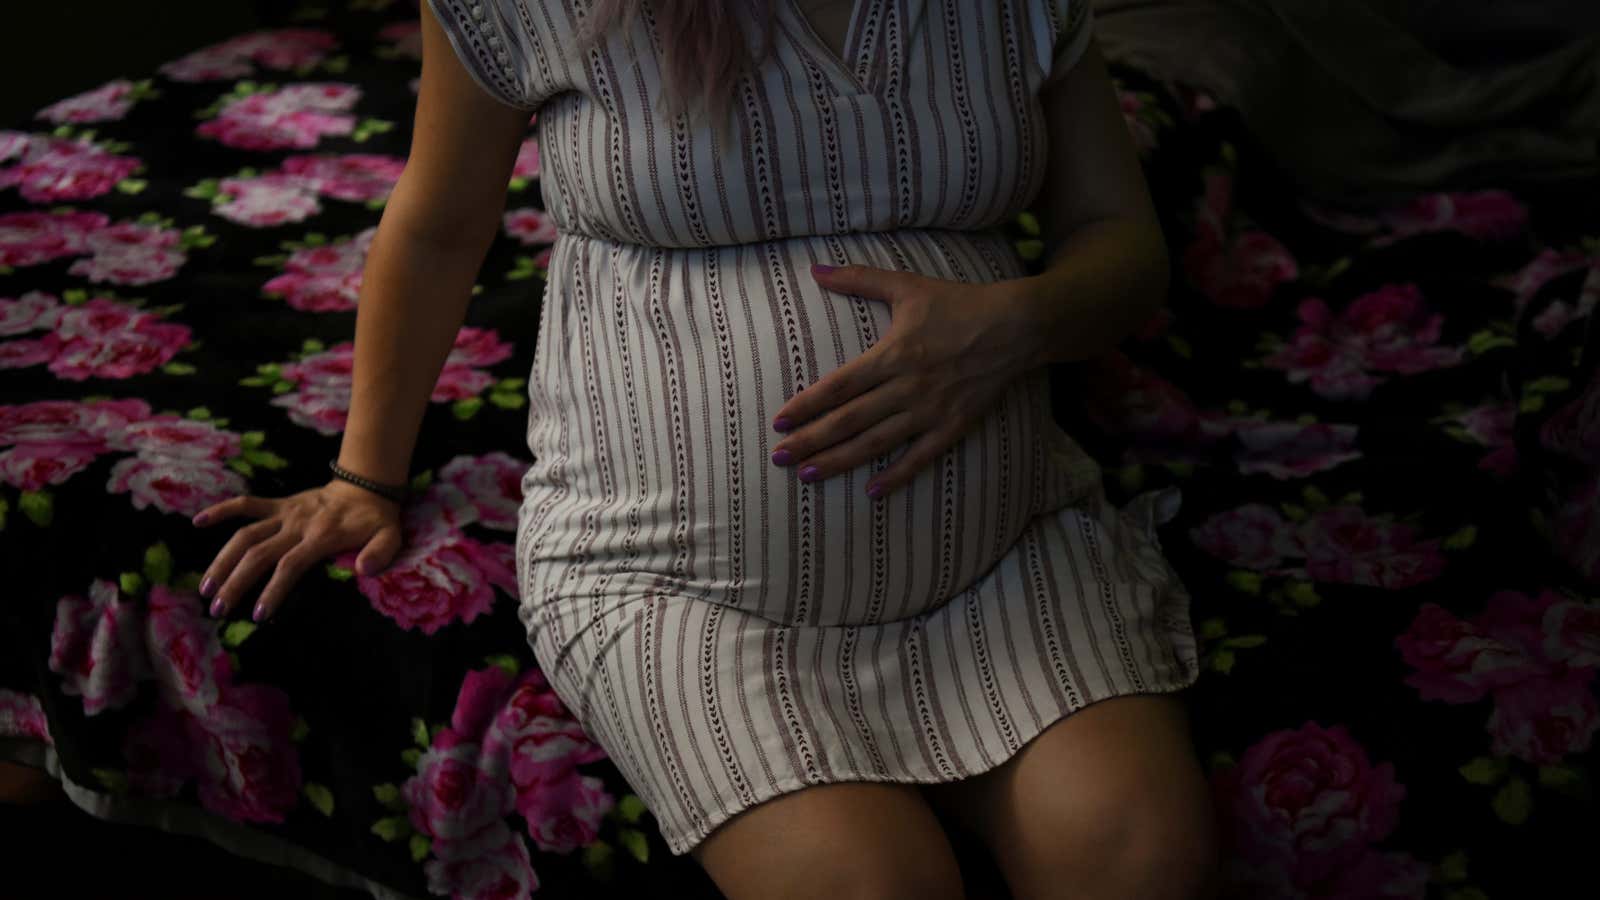 More parents-to-be might are considering home birth during the pandemic.